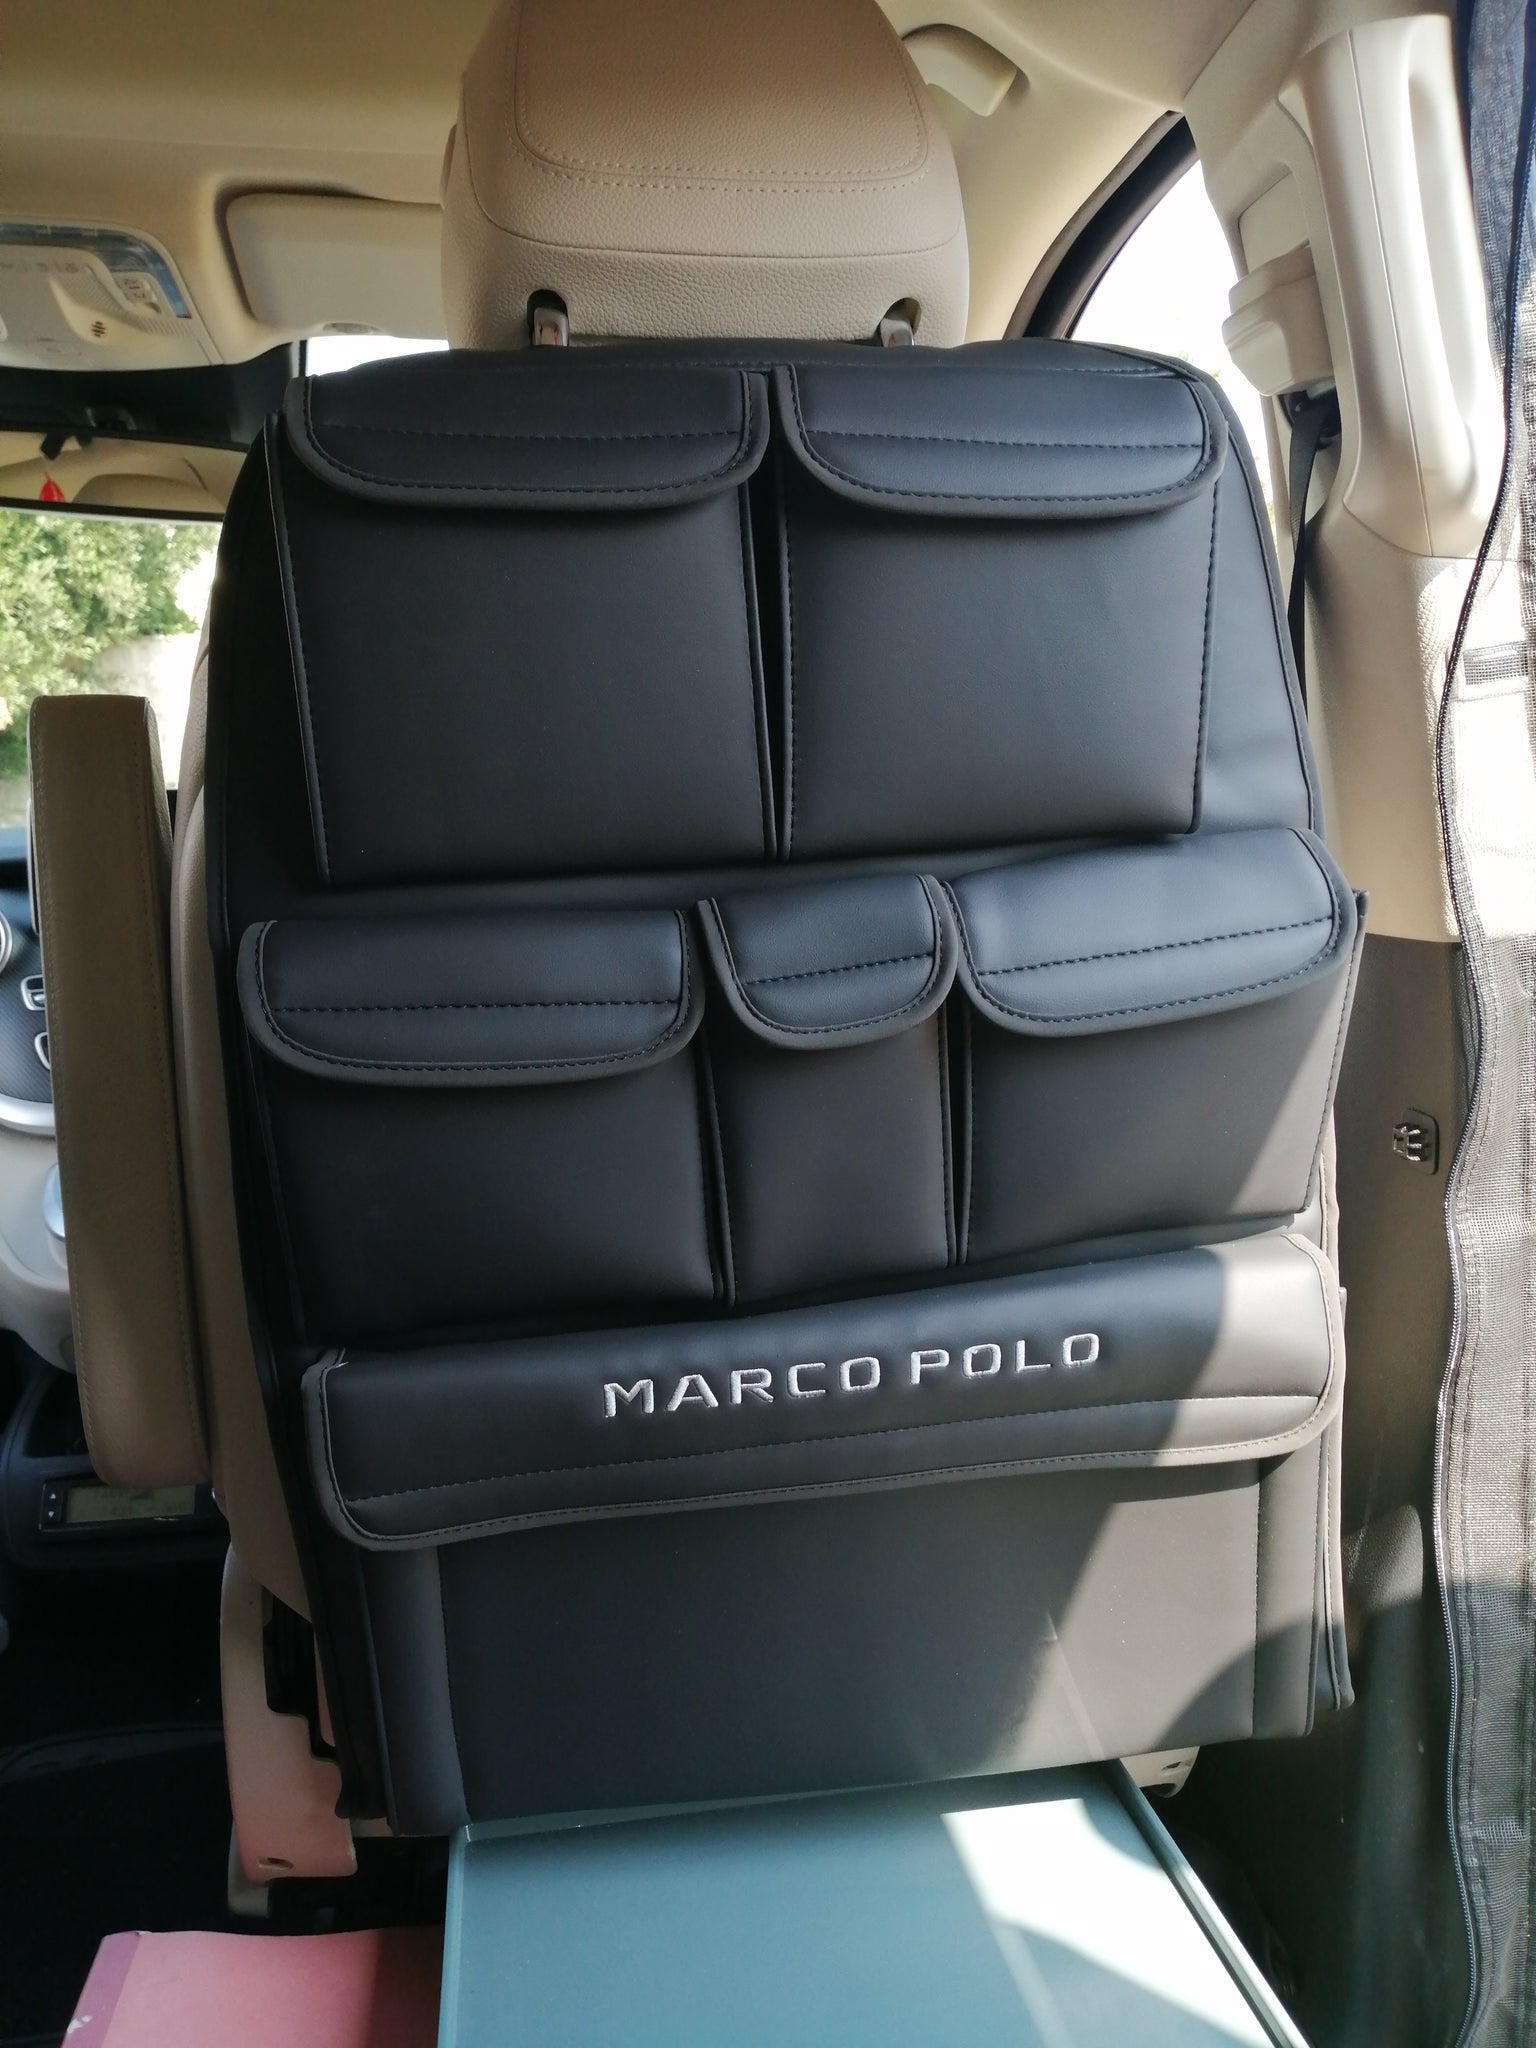 INKA Tailored Mercedes Benz Marco Polo Seat Storage Pockets Tidy